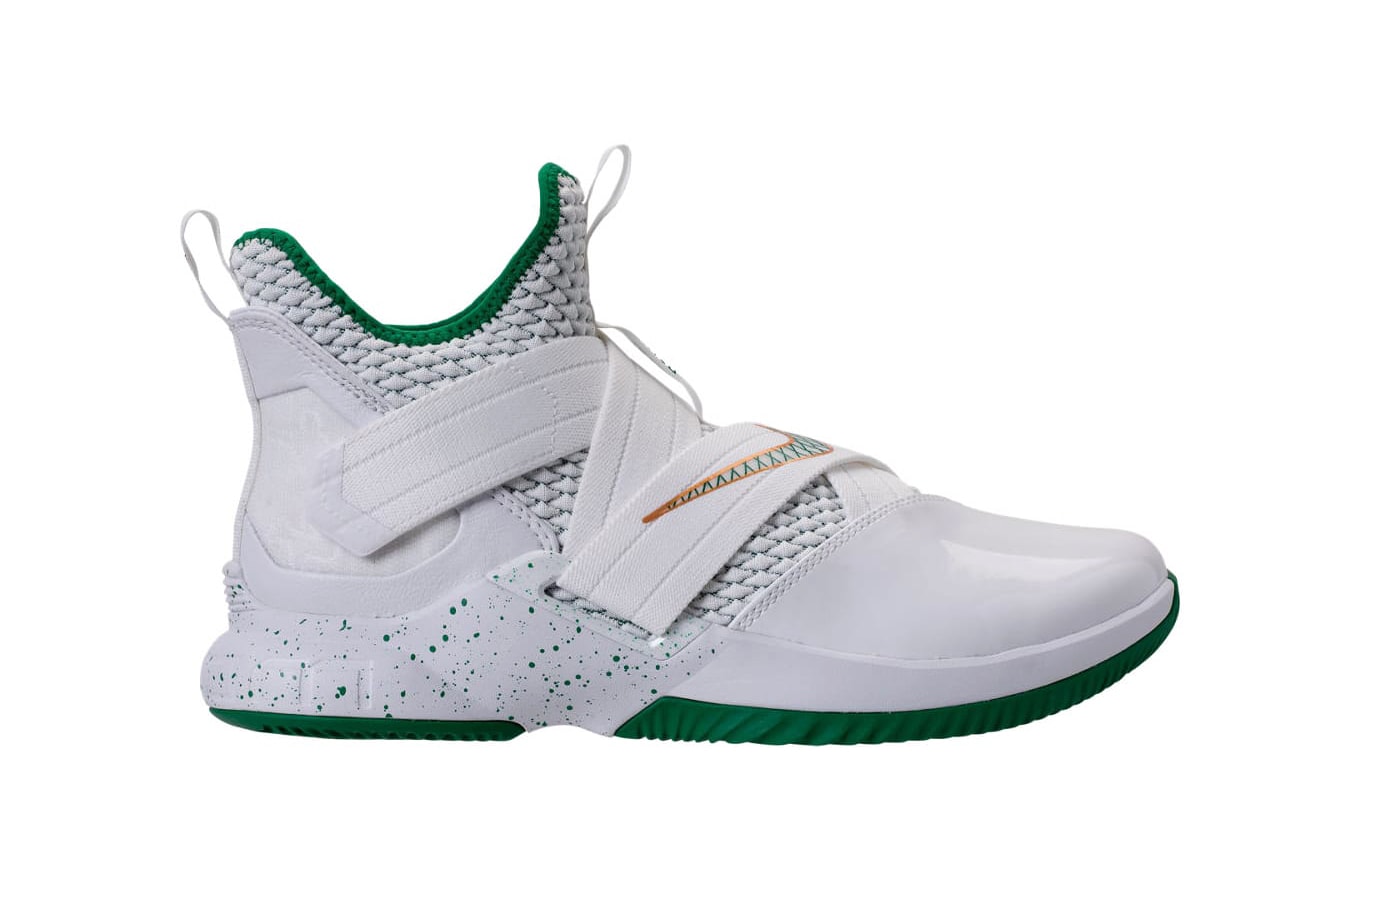 Nike LeBron Soldier 12 SVSM Home saint vincent saint mary may 5 2018 release date info drop sneakers shoes footwear james